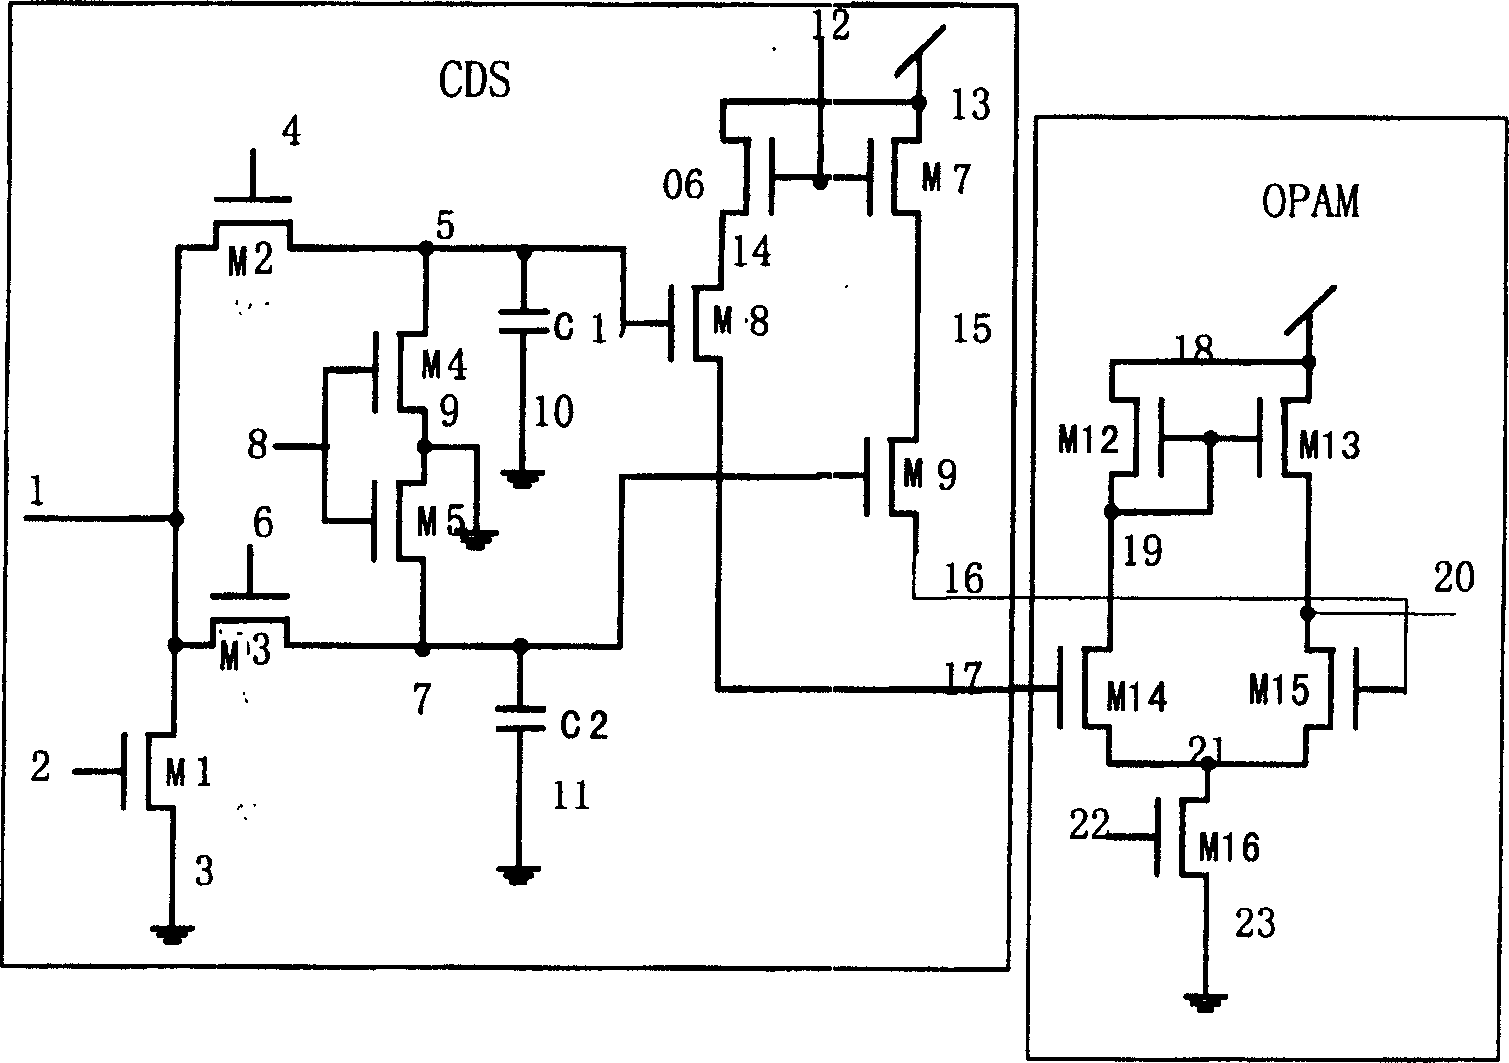 High matching low power consumption low noise CDS cirecuit structure